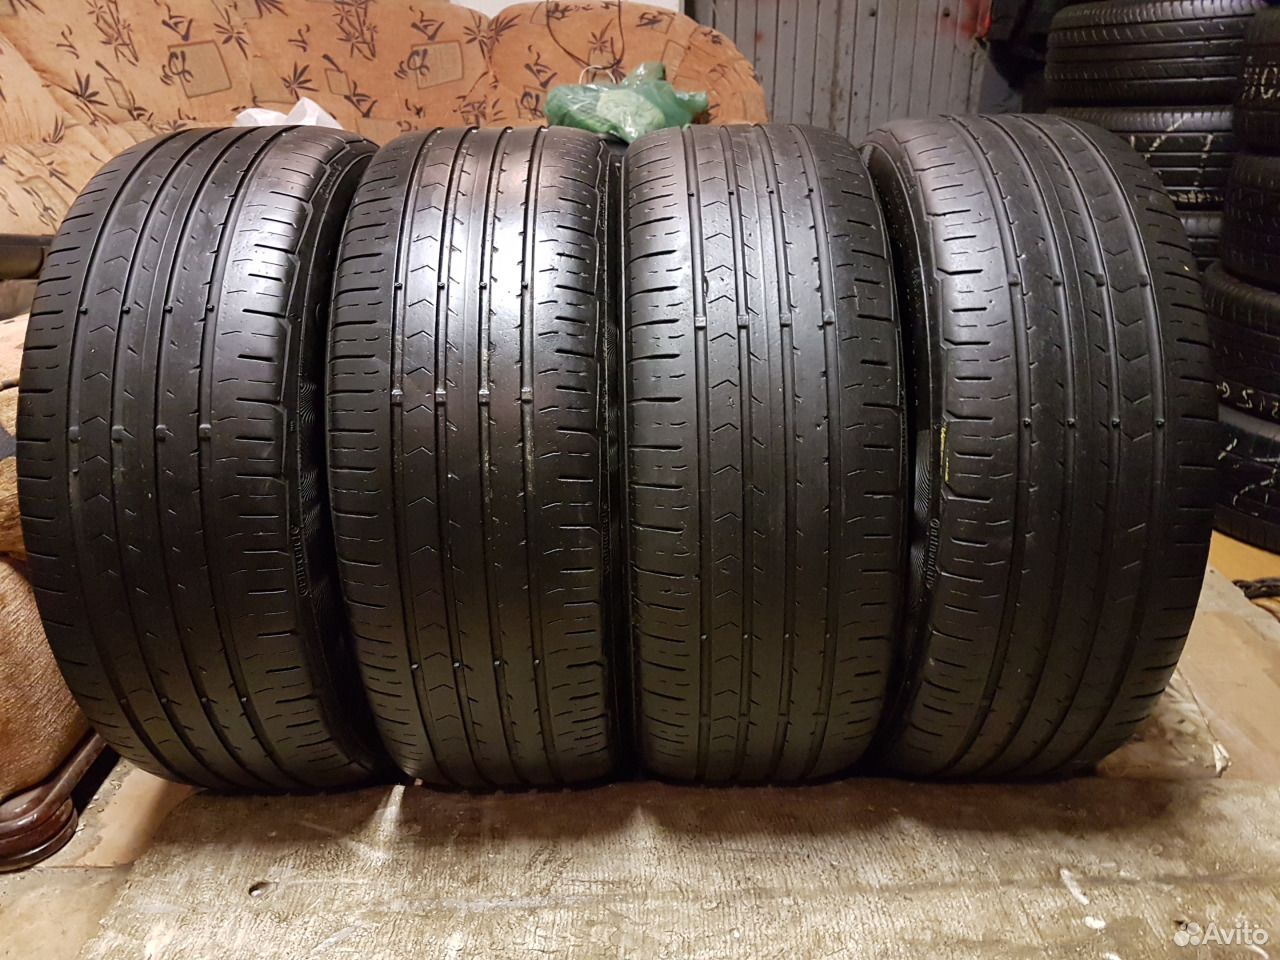 Continental CONTIPREMIUMCONTACT 5 205/55 r16. Continental CONTIPREMIUMCONTACT 7. Шина Continental CONTIPREMIUMCONTACT. Continental 205/55r16 91h CONTIPREMIUMCONTACT 5 TL. Contipremiumcontact 5 205 55 r16 купить